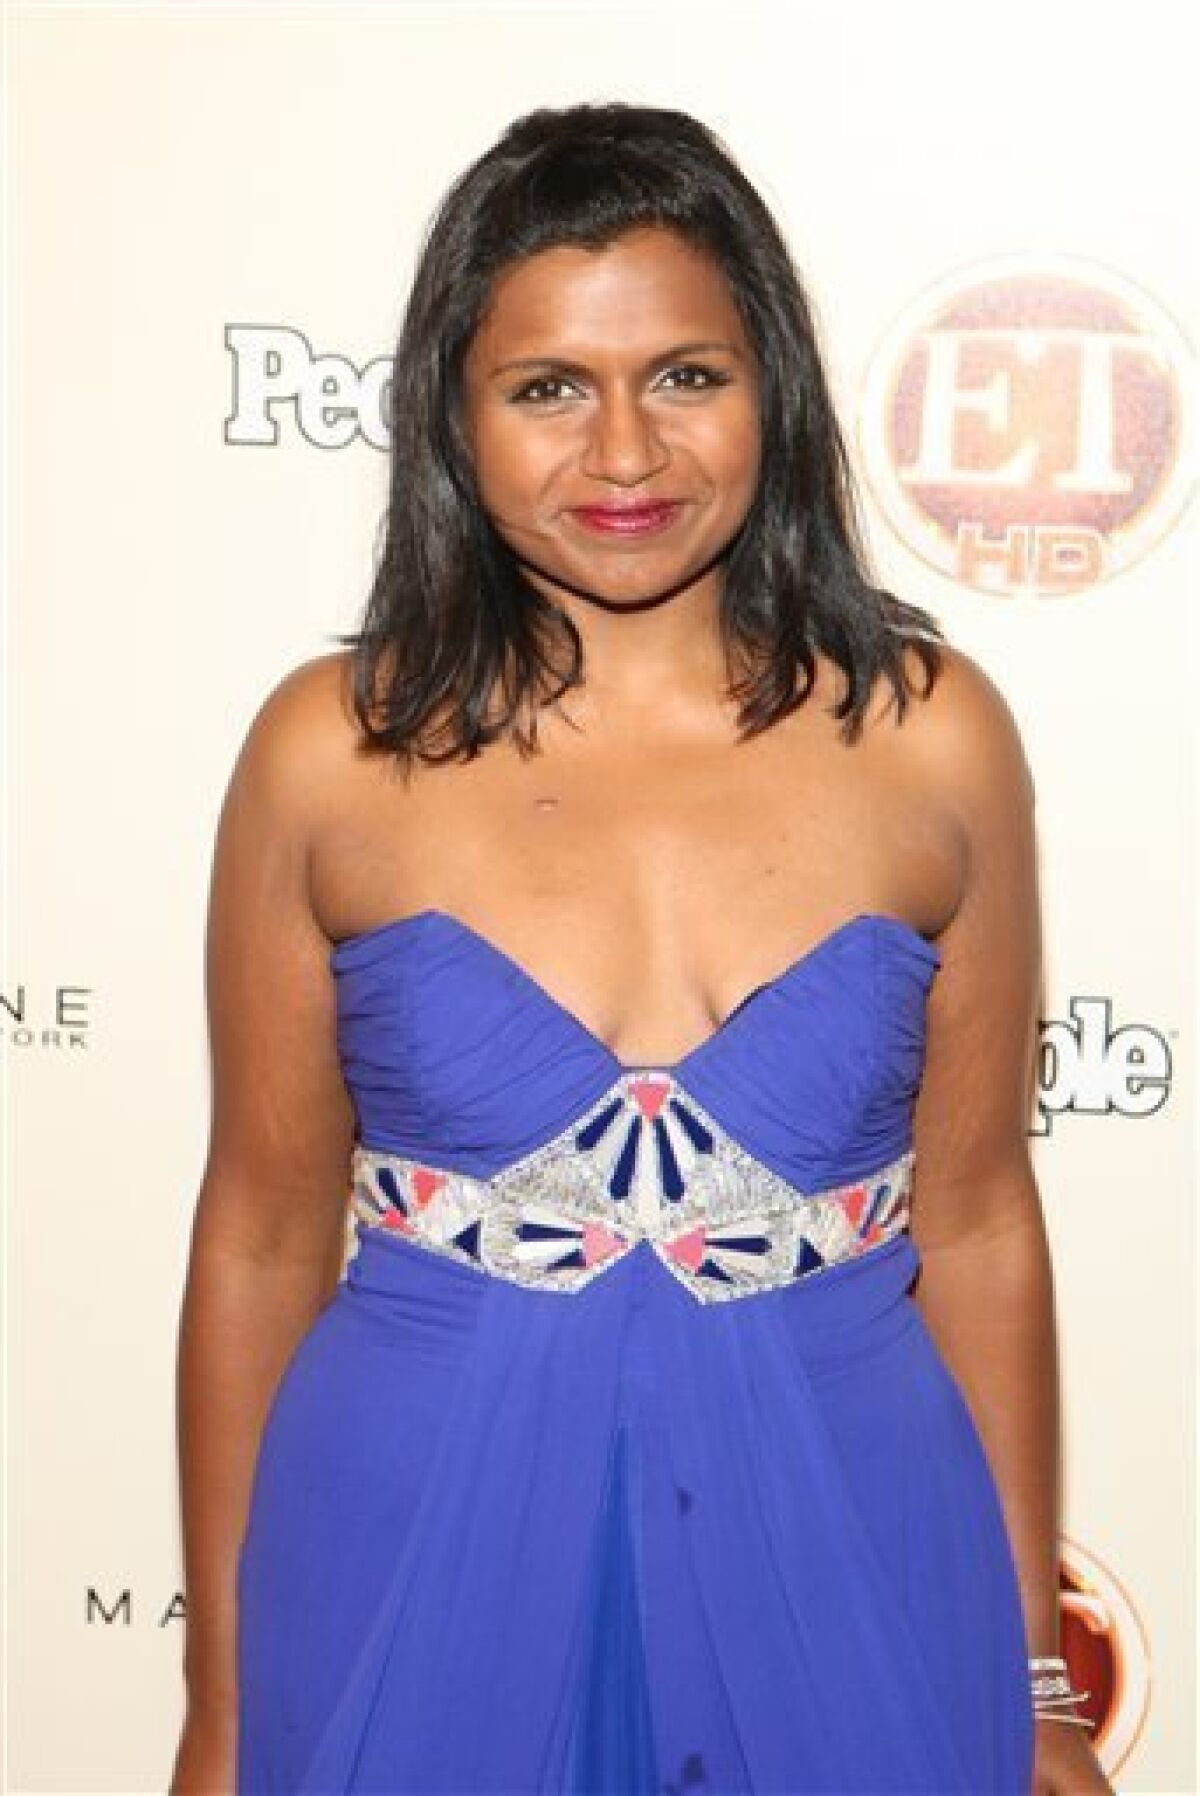 Tales coming from Mindy Kaling of 'The Office' - The San Diego Union-Tribune